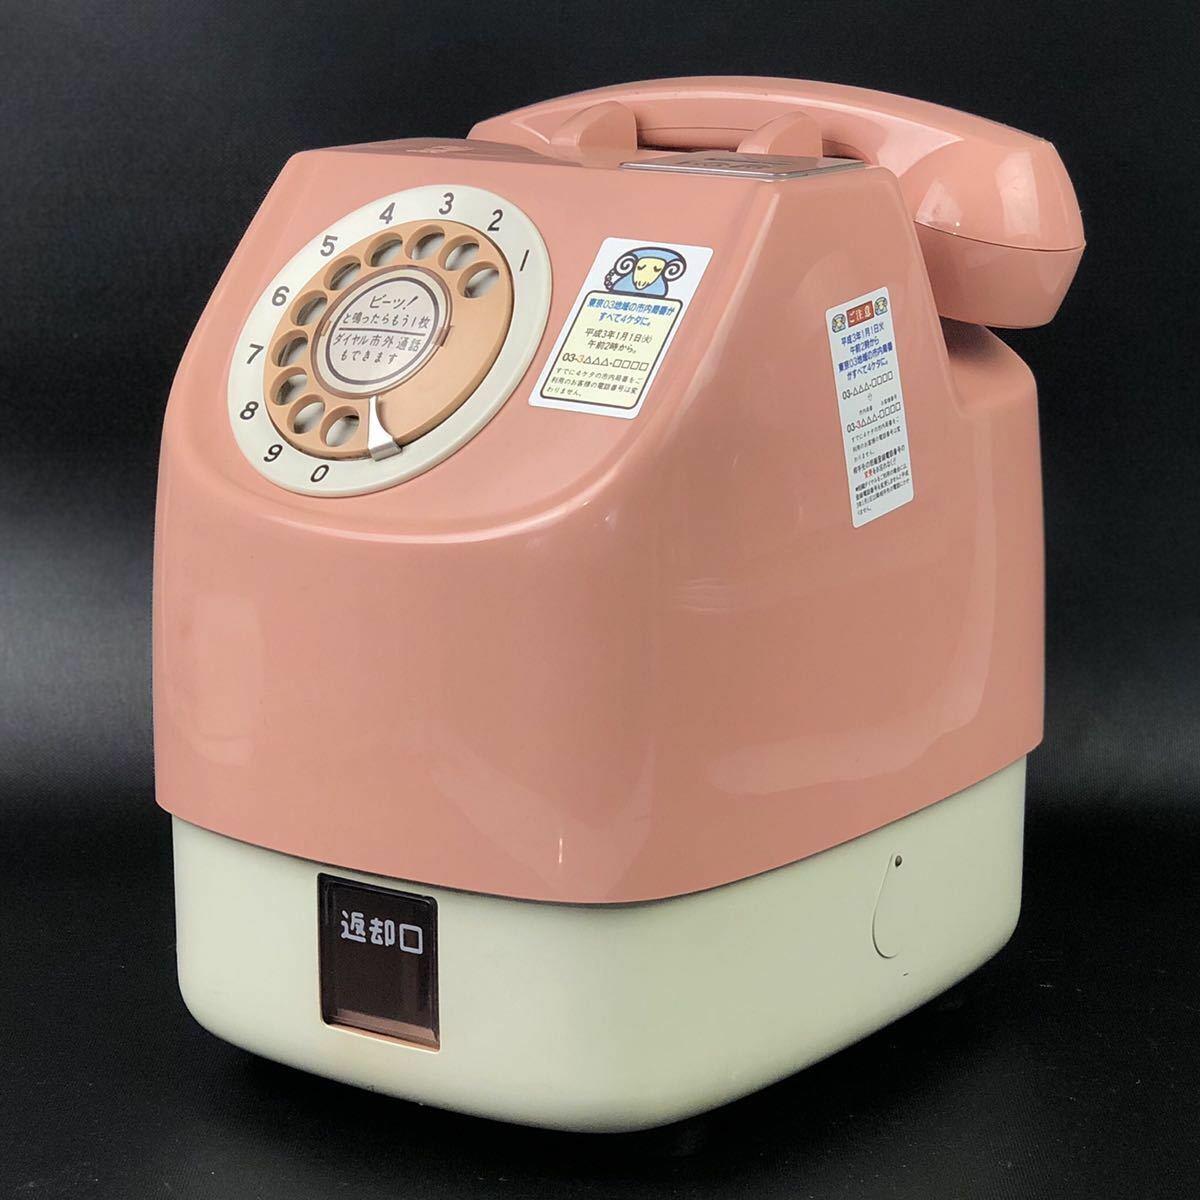 Retro Pink Phone Public Phone 10 Yen Made in 1986 With Key / Box Missing